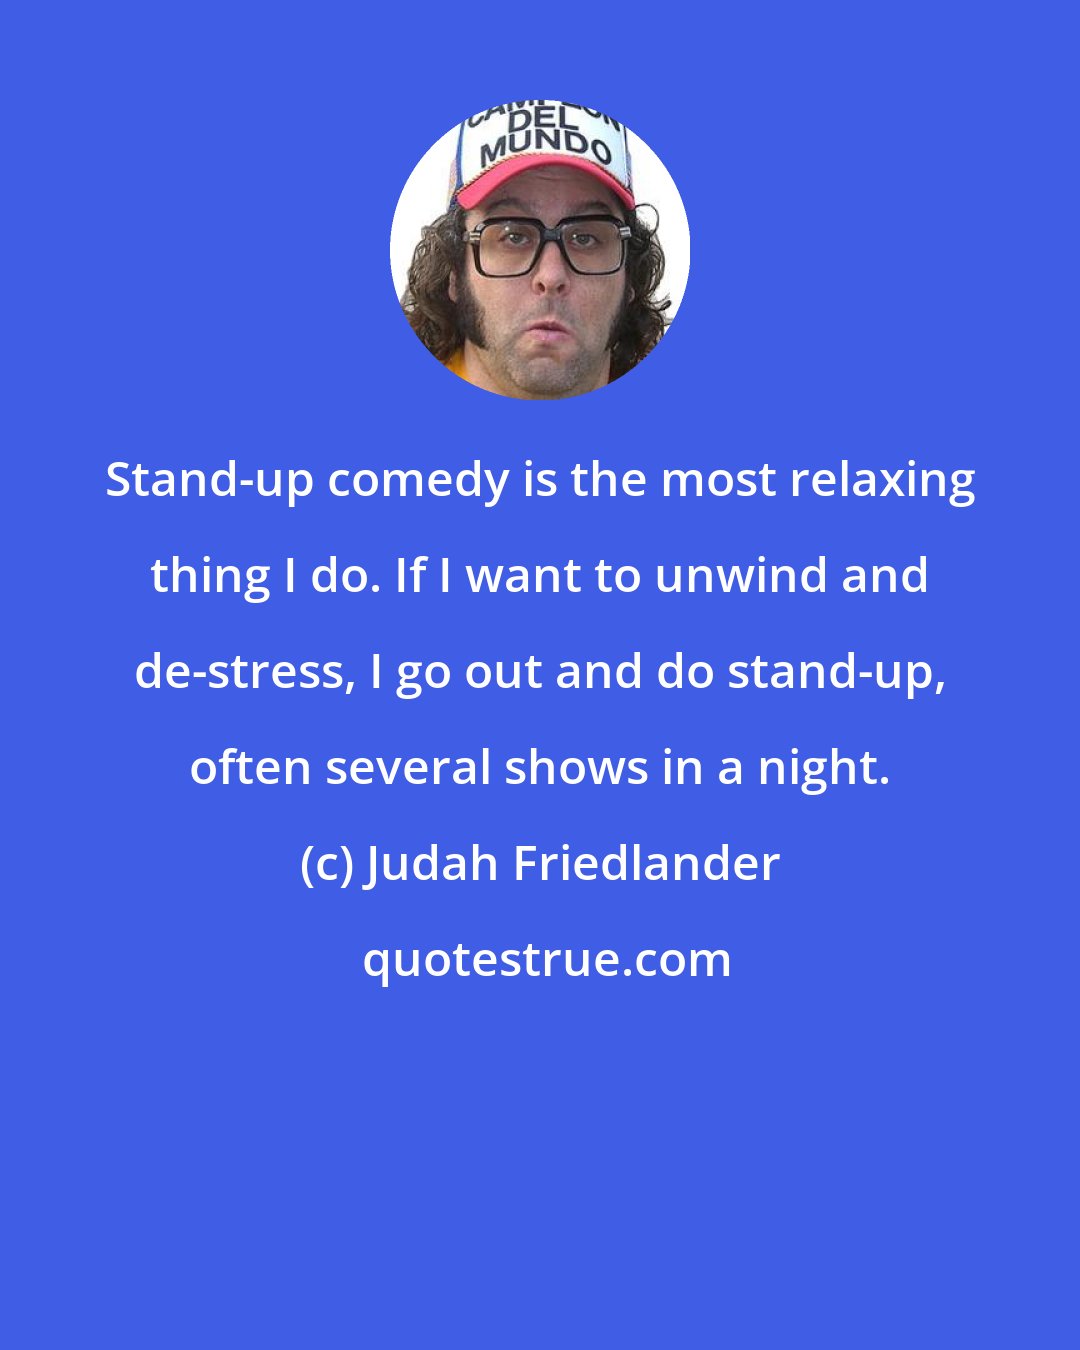 Judah Friedlander: Stand-up comedy is the most relaxing thing I do. If I want to unwind and de-stress, I go out and do stand-up, often several shows in a night.